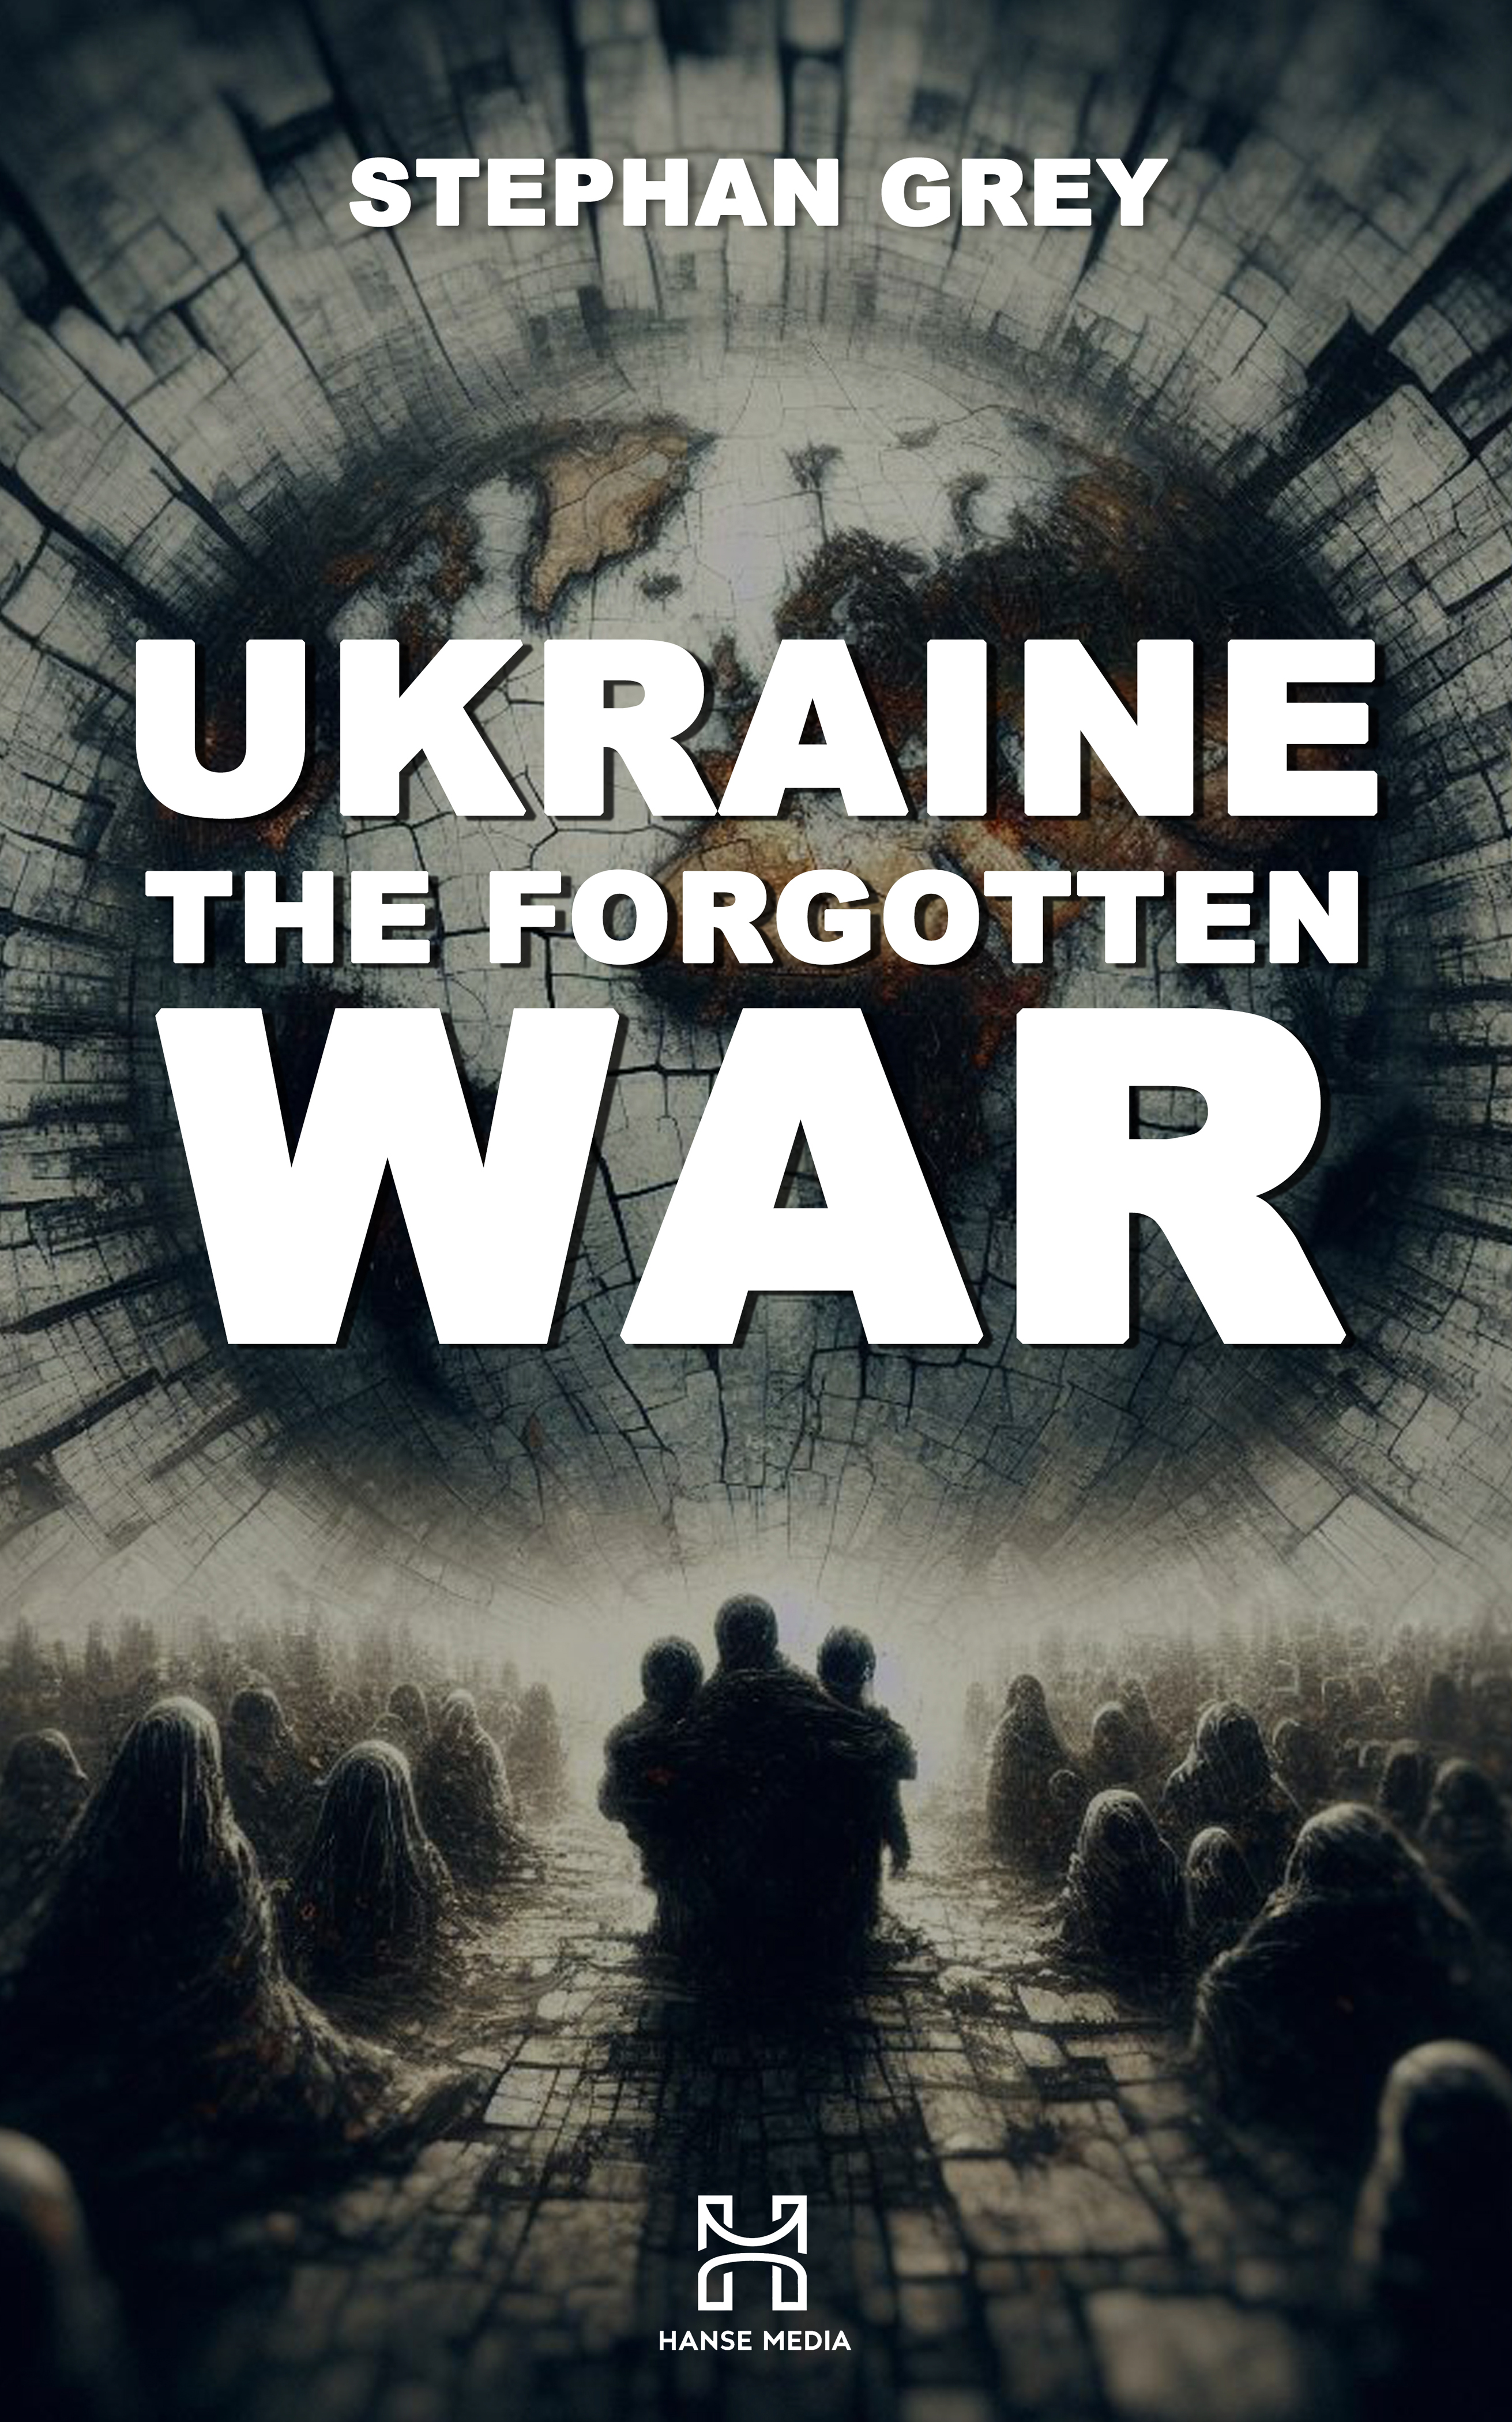 Ukraine The Forgotten War is the new book by Stephan Grey